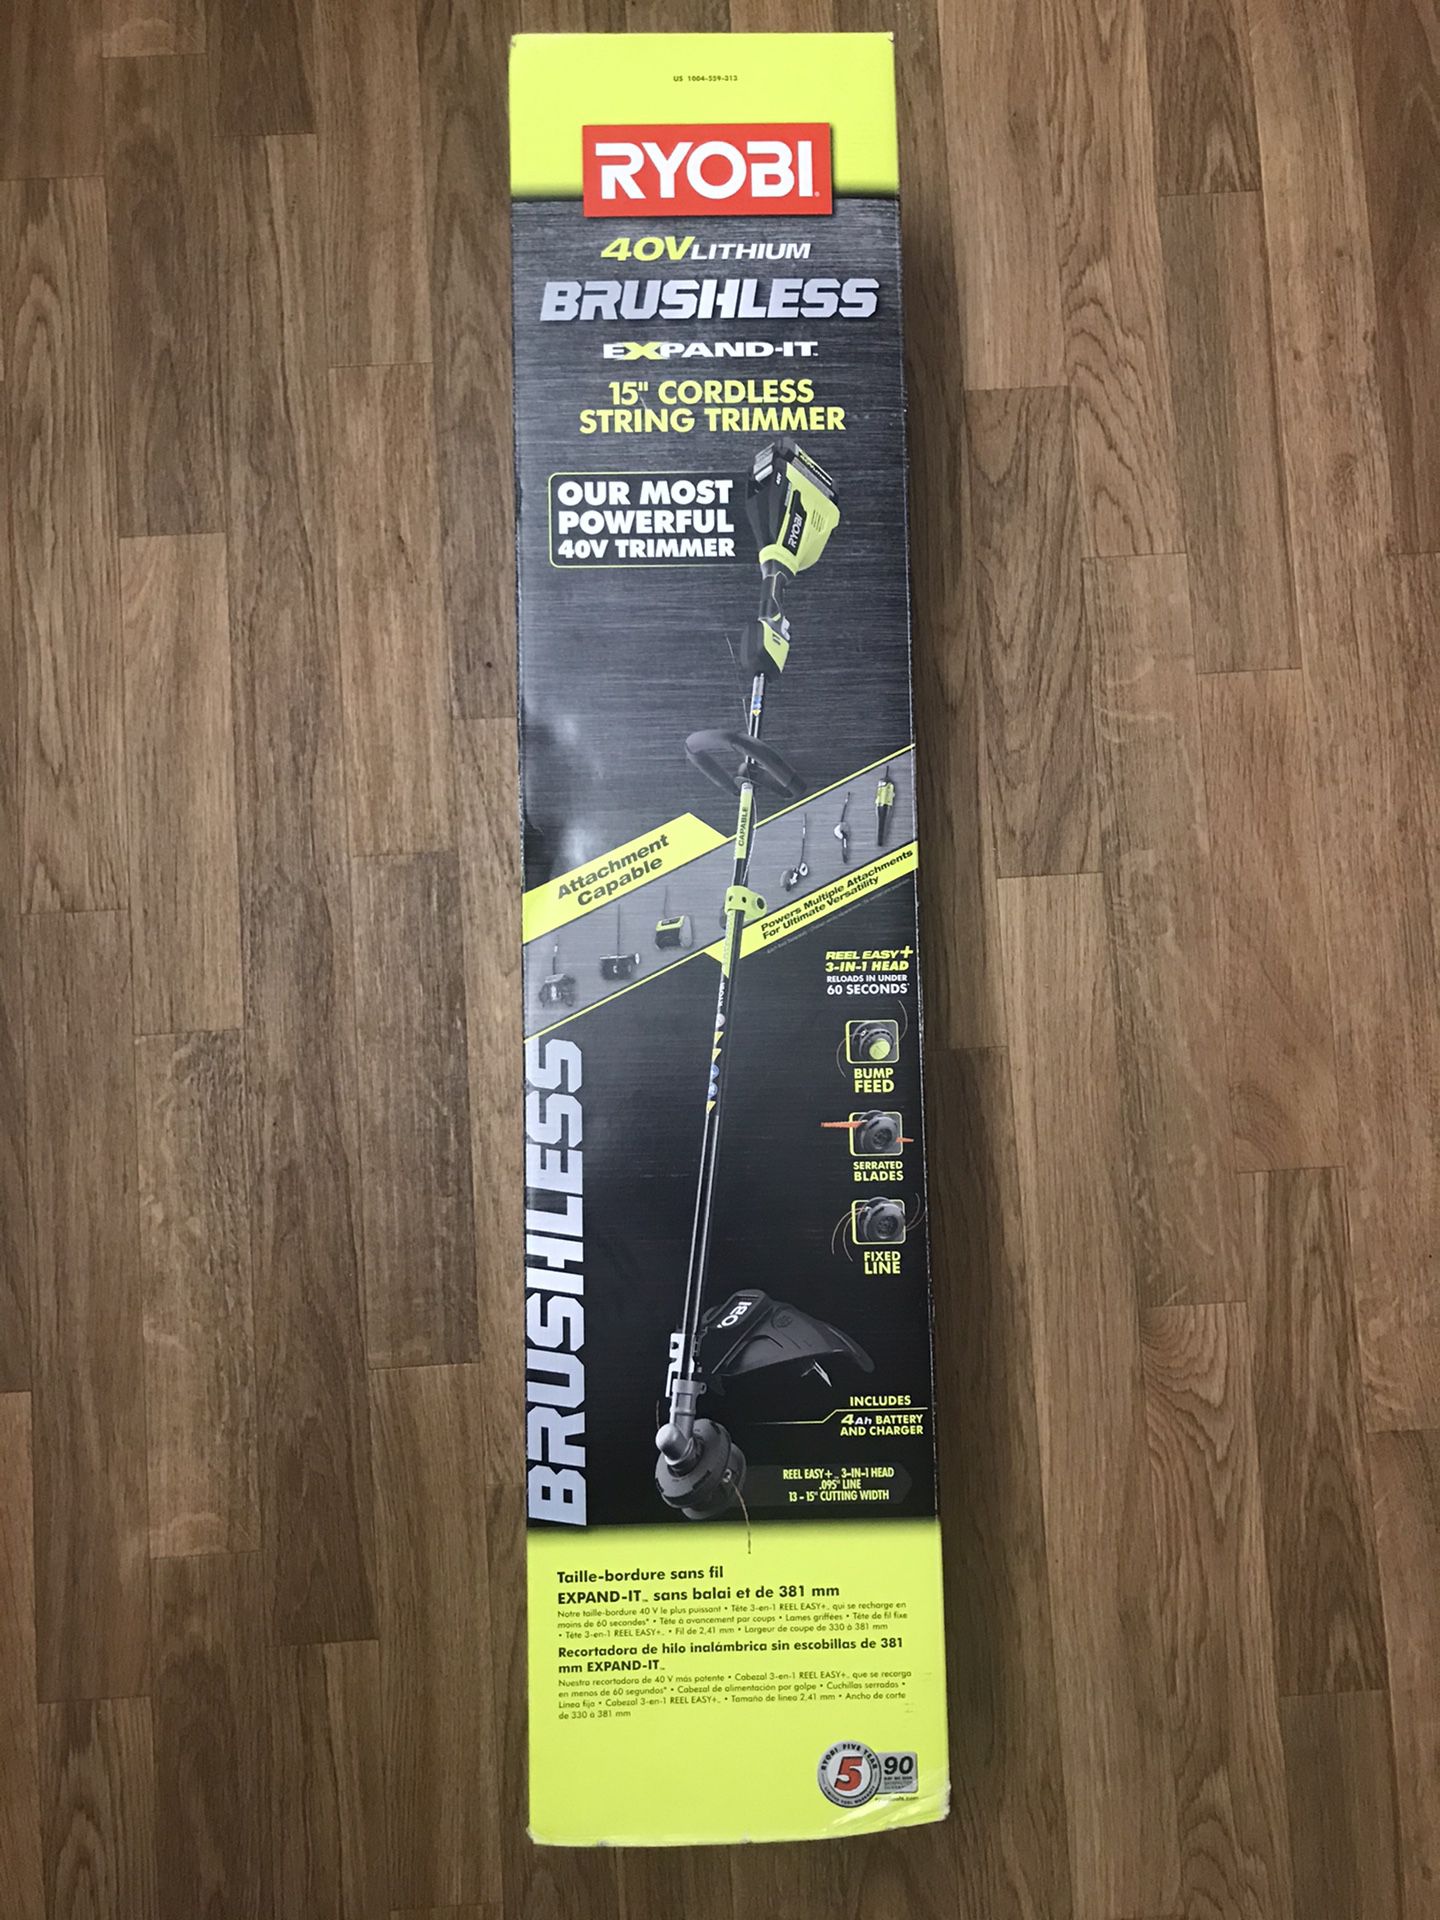 RYOBI 40-Volt Lithium-Ion Brushless Electric Cordless Attachment Capable String Trimmer 4.0 Ah Battery and Charger Included